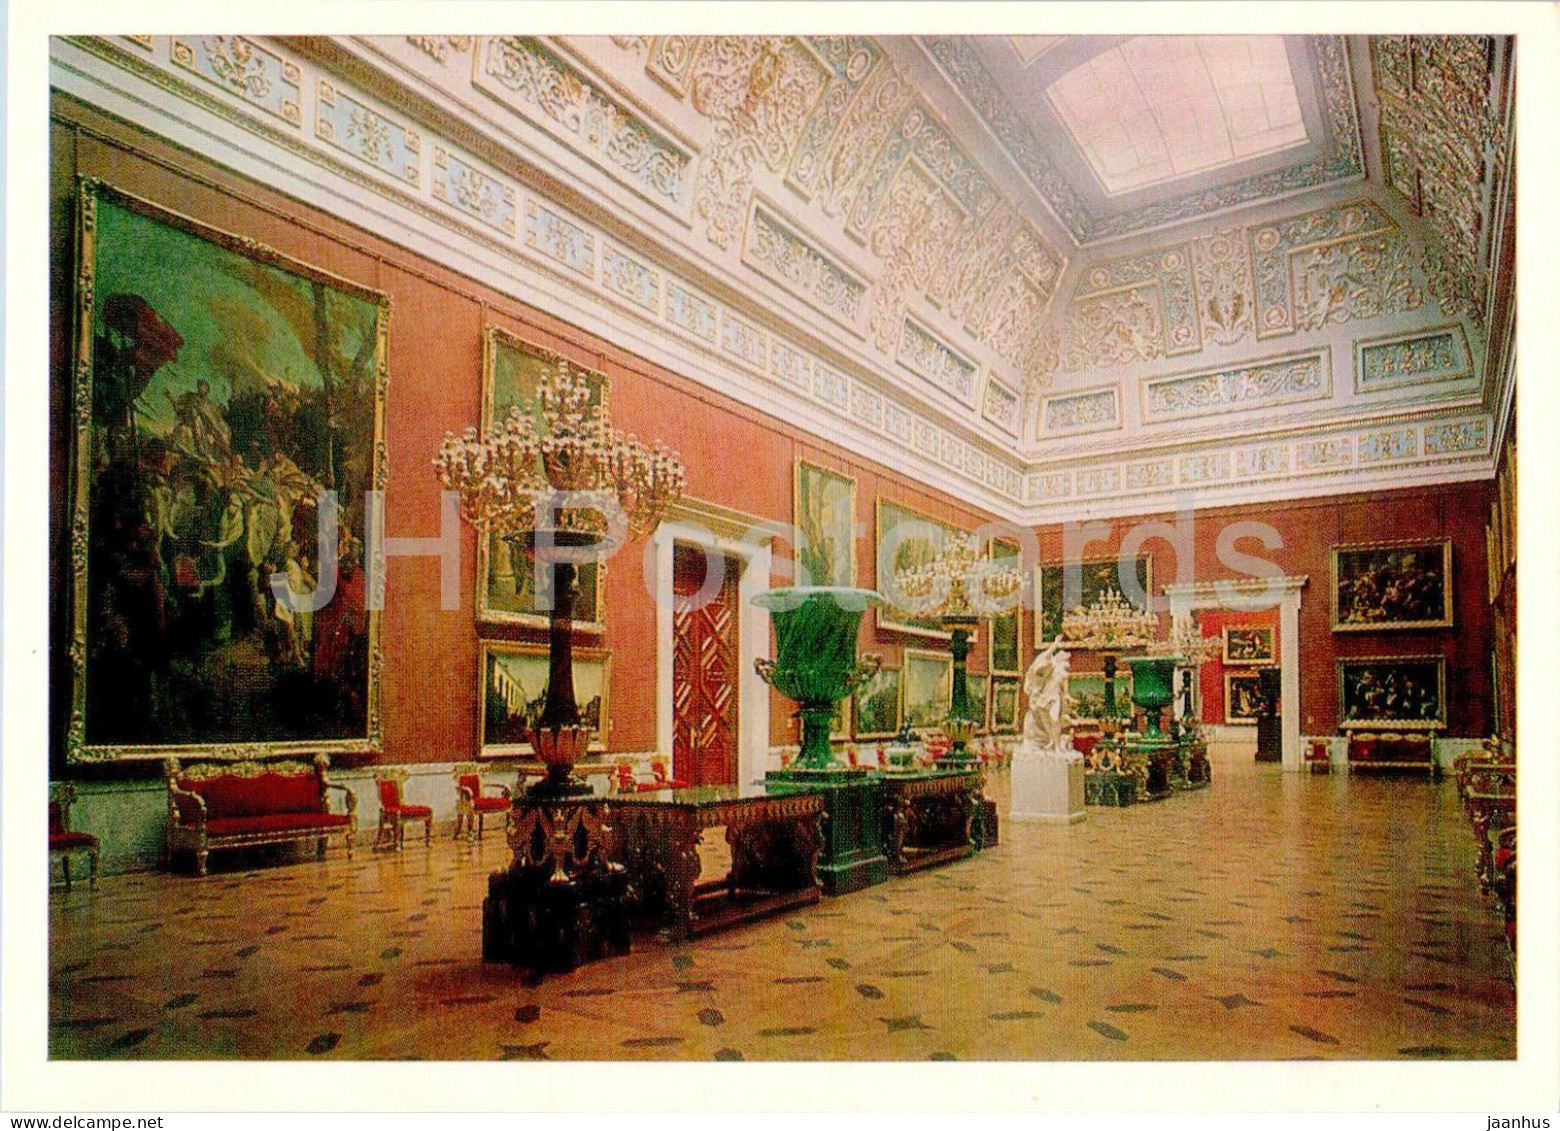 Leningrad - St Petersburg - The Great Top-lighted Hall In The New Hermitage - Museum - 1984 - Russia USSR - Unused - Russie